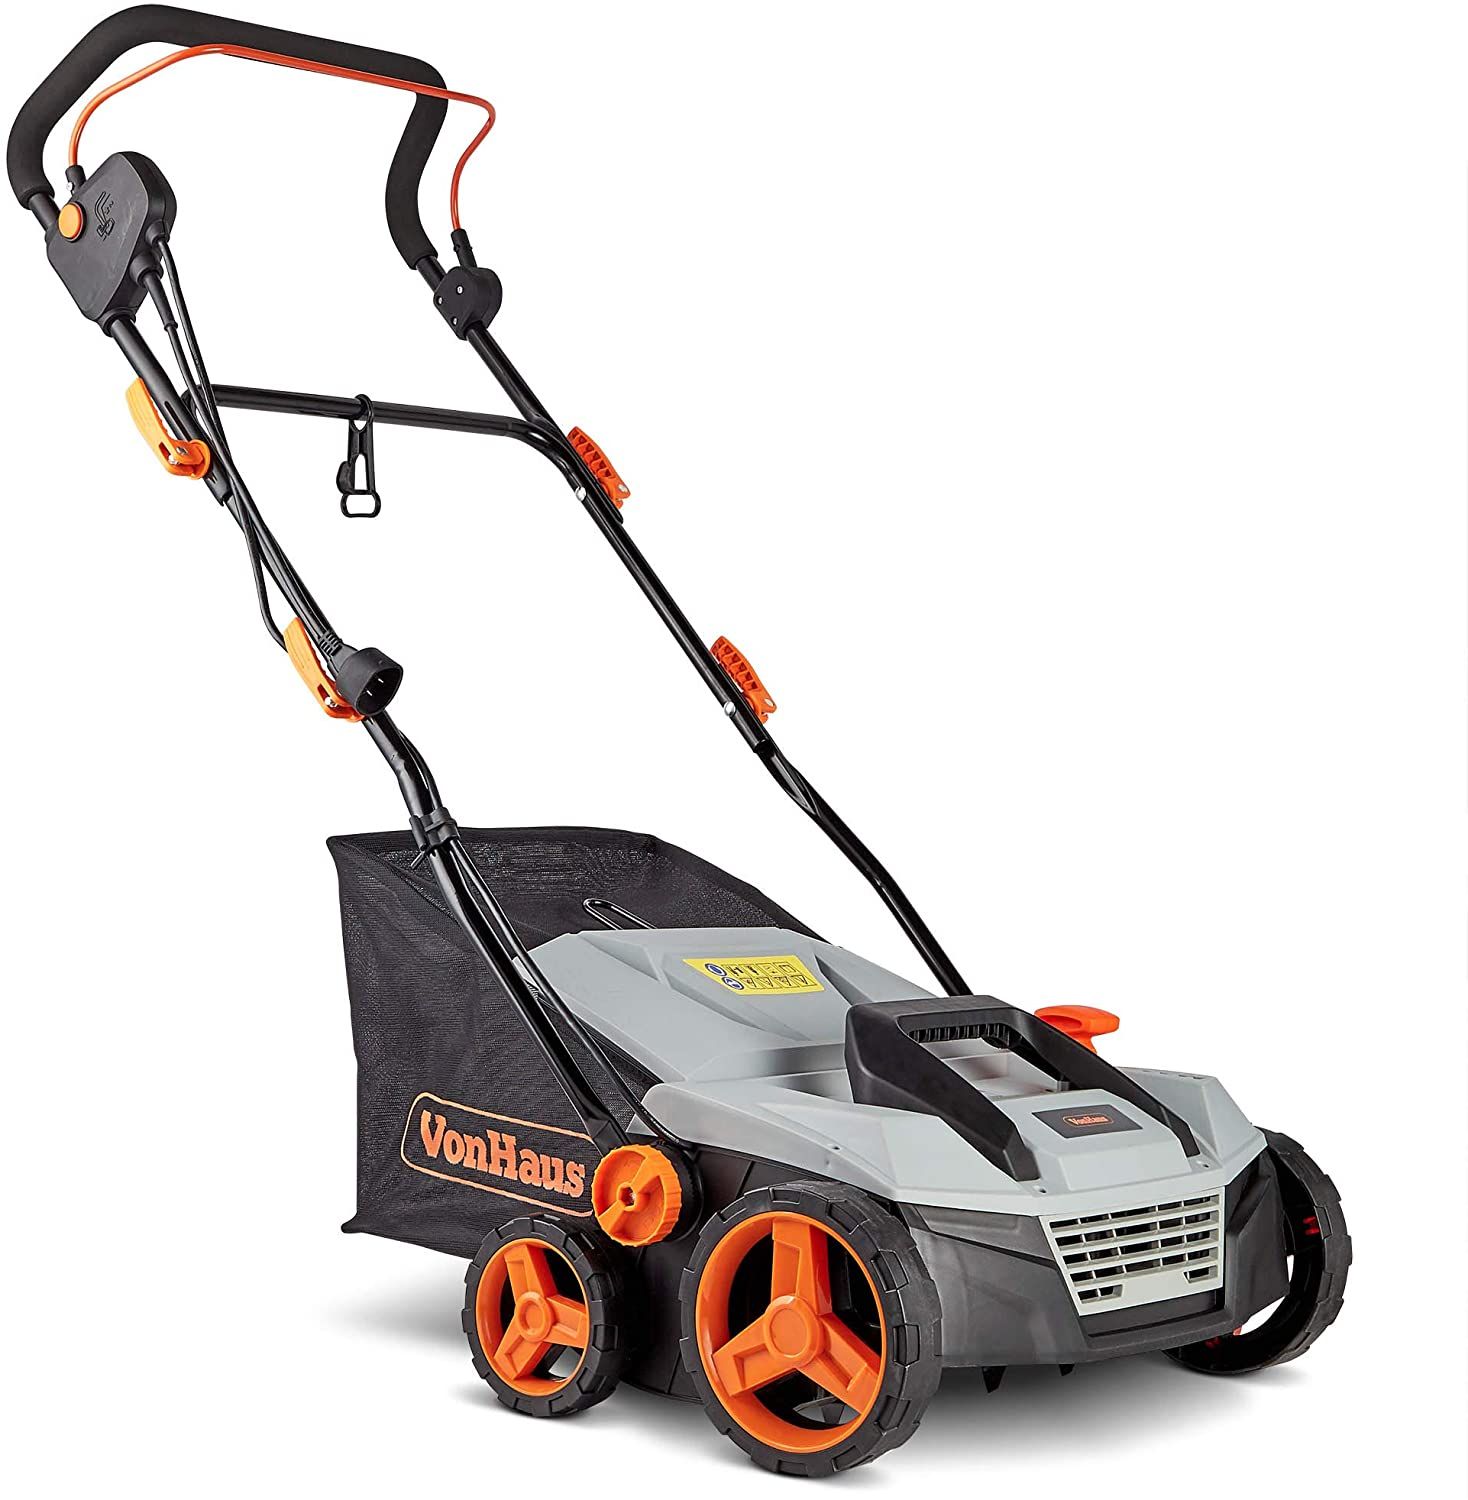 VonHaus Corded Electric 2-in-1 Lawn Dethatcher and Aerator - $$title$$